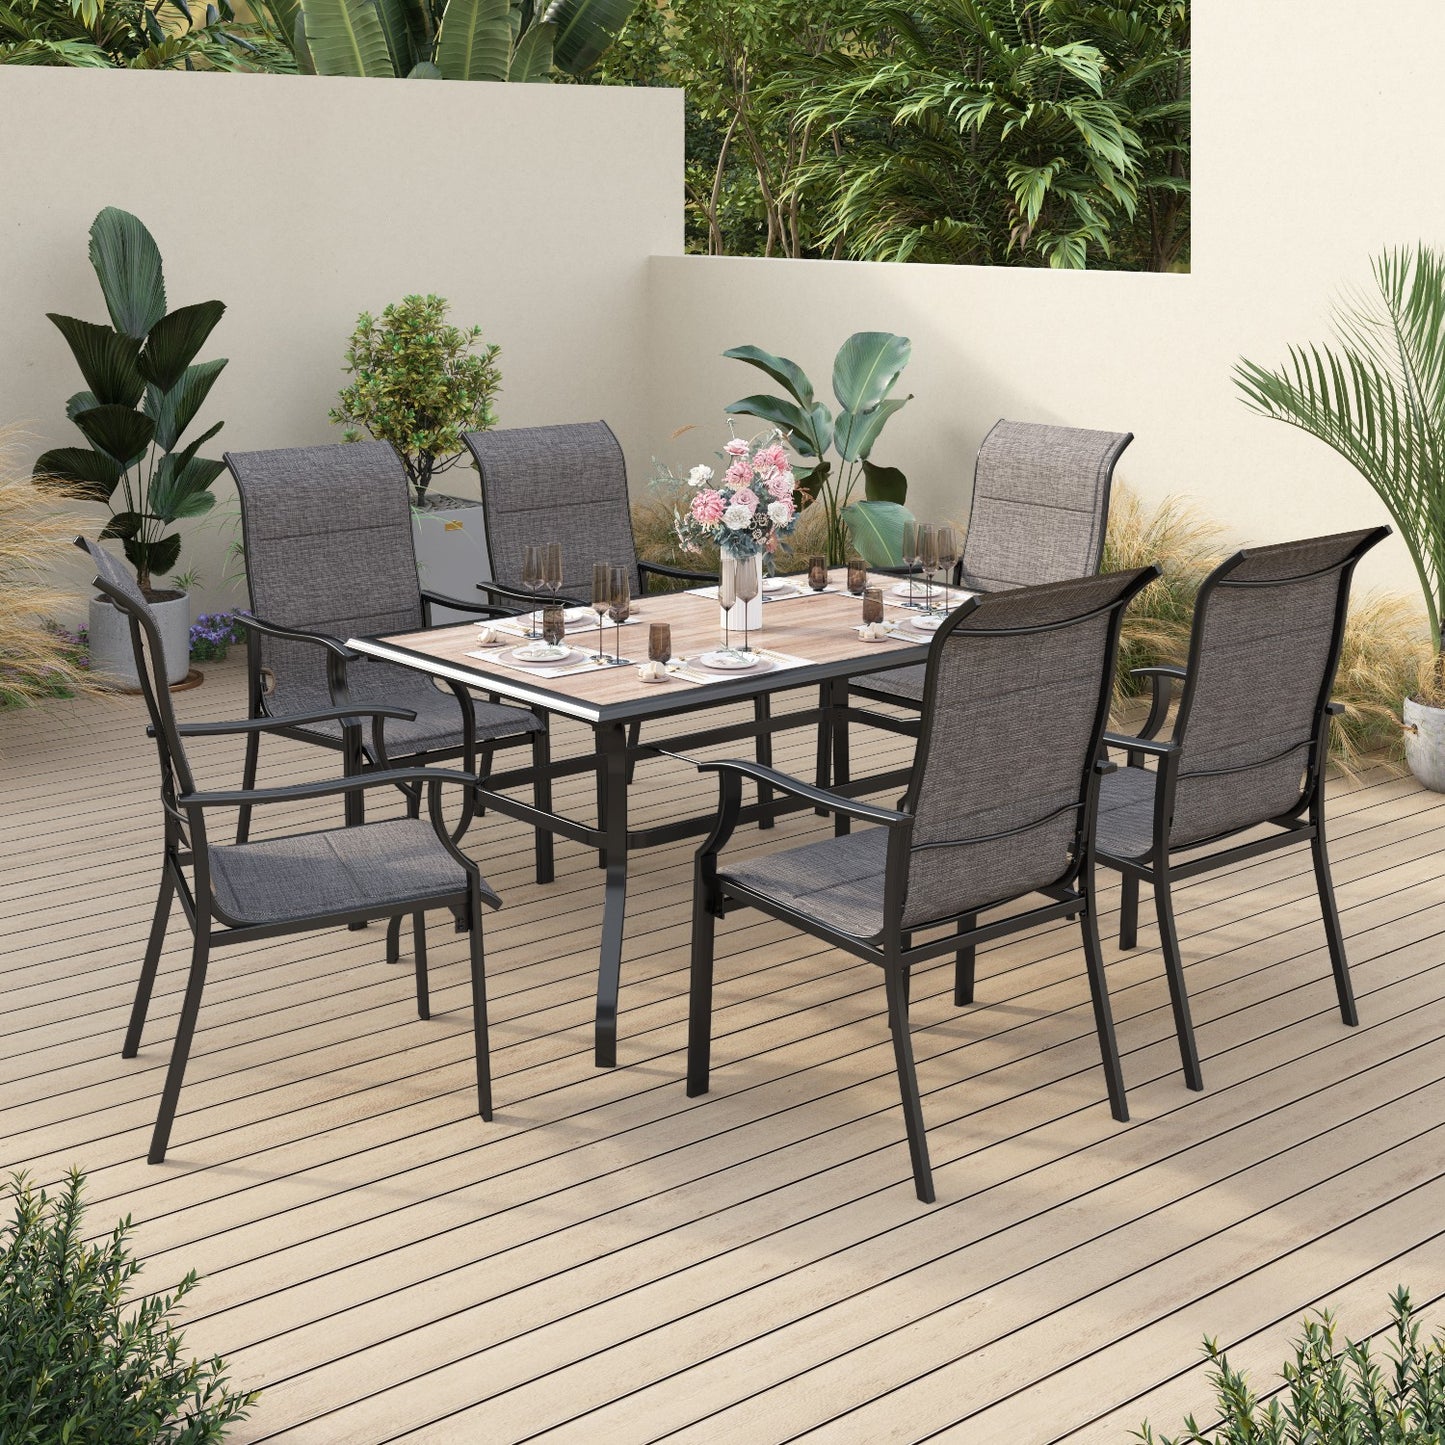 Sophia & William 7 Pieces Metal Patio Dining Set for 6 People Outdoor Chairs Table Set